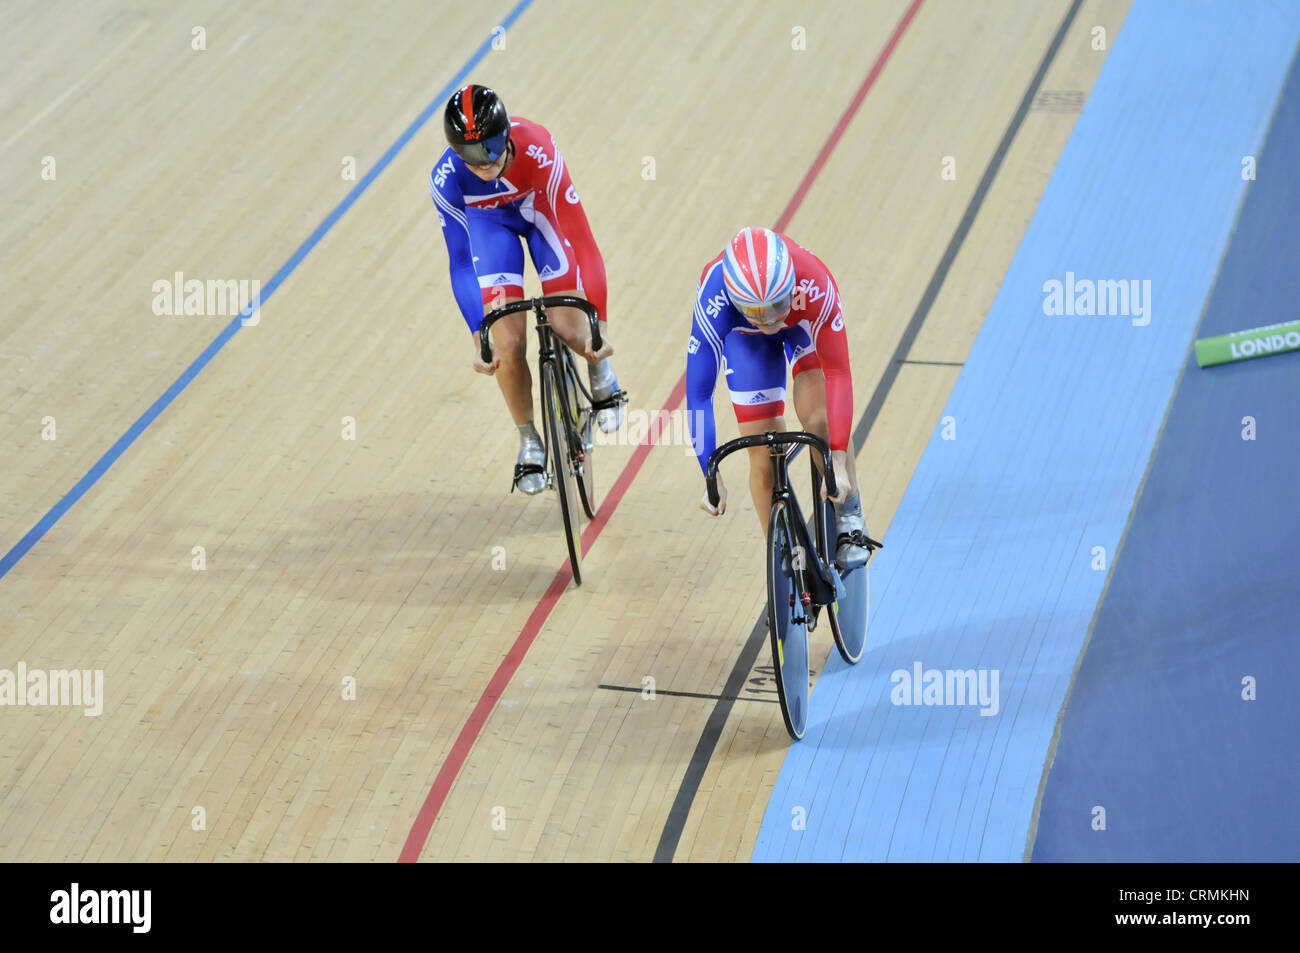 Jessica Varnish and Victoria Pendleton MBE in the Women's Team Sprint at the UCI Track Cycling World Cup, London 2012 Velodrome. Stock Photo